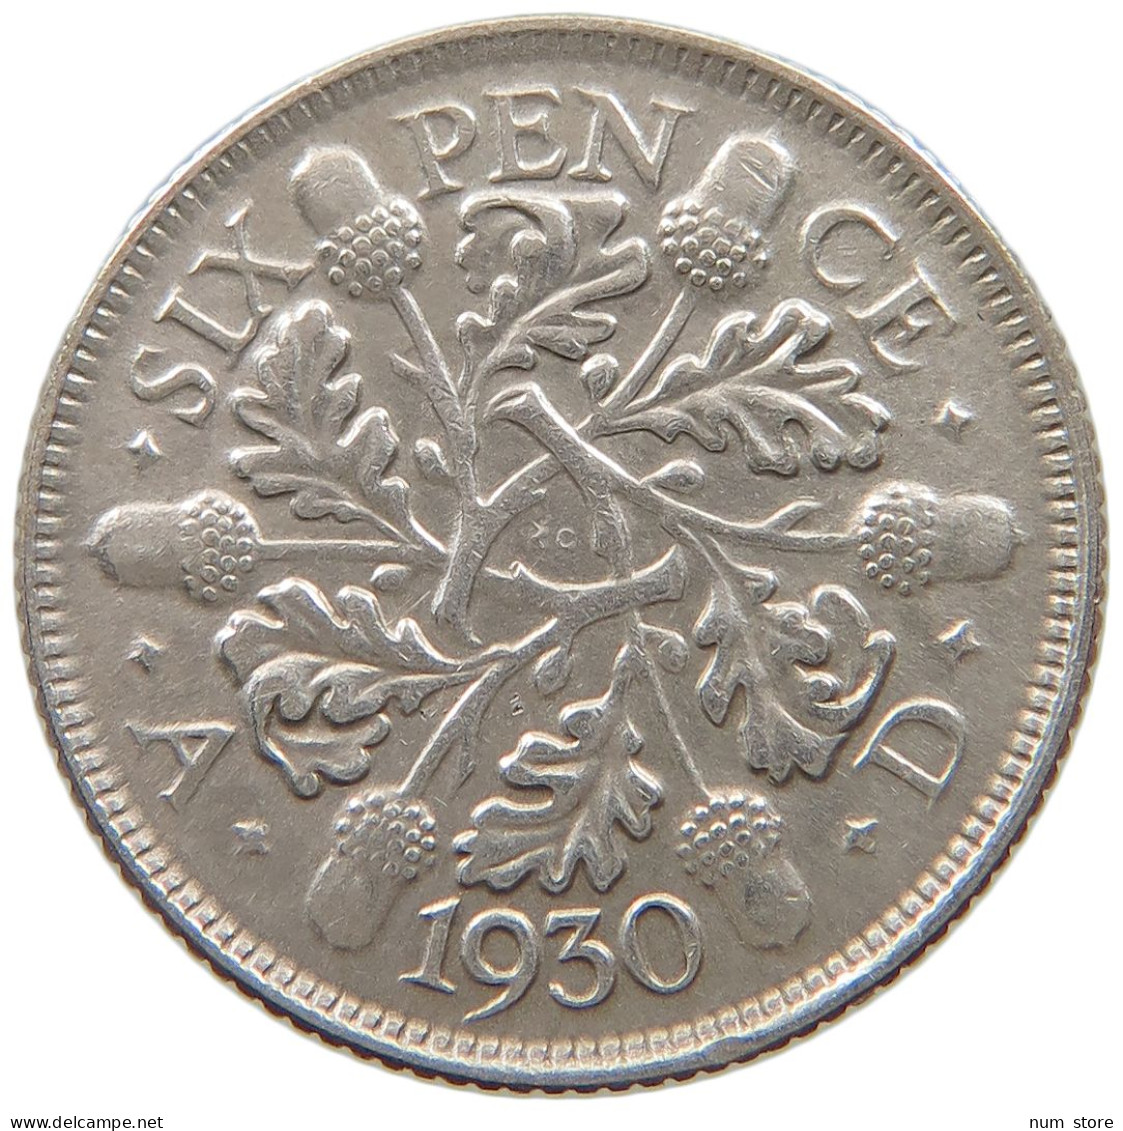 GREAT BRITAIN SIXPENCE 1930 George V. (1910-1936) #a045 0657 - H. 6 Pence